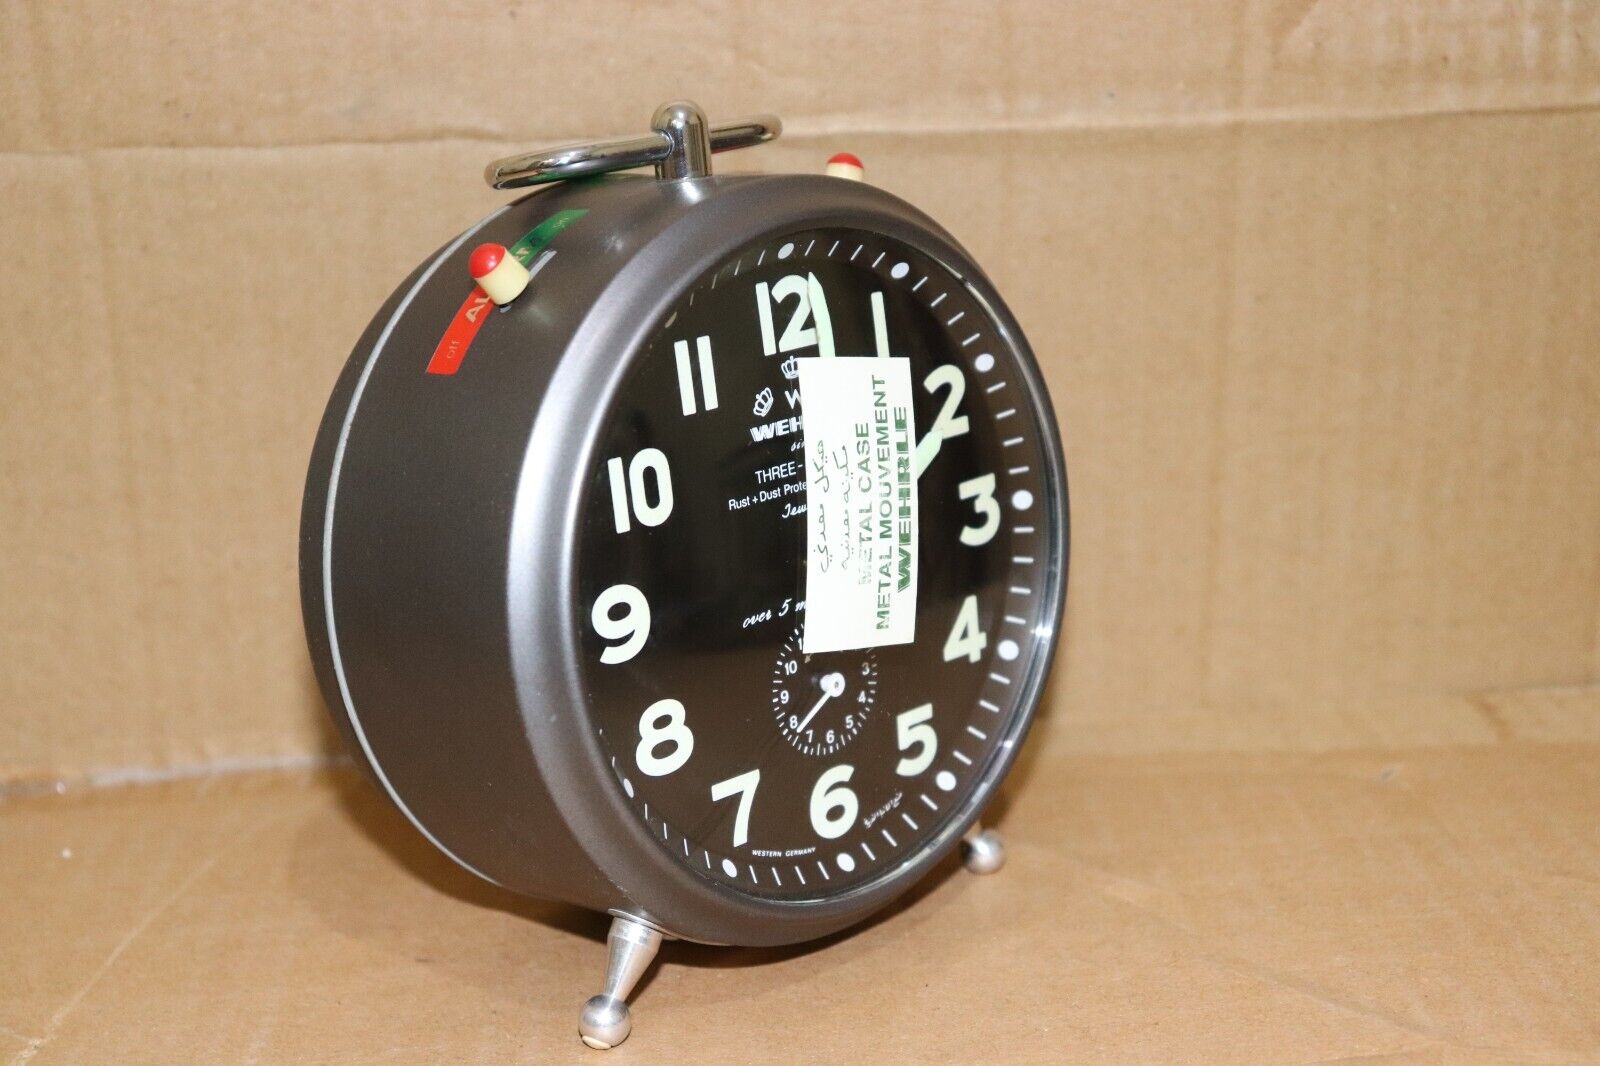 Rare Vintage Three In One Wehrle Alarm Clock Made In Germany New Original box.